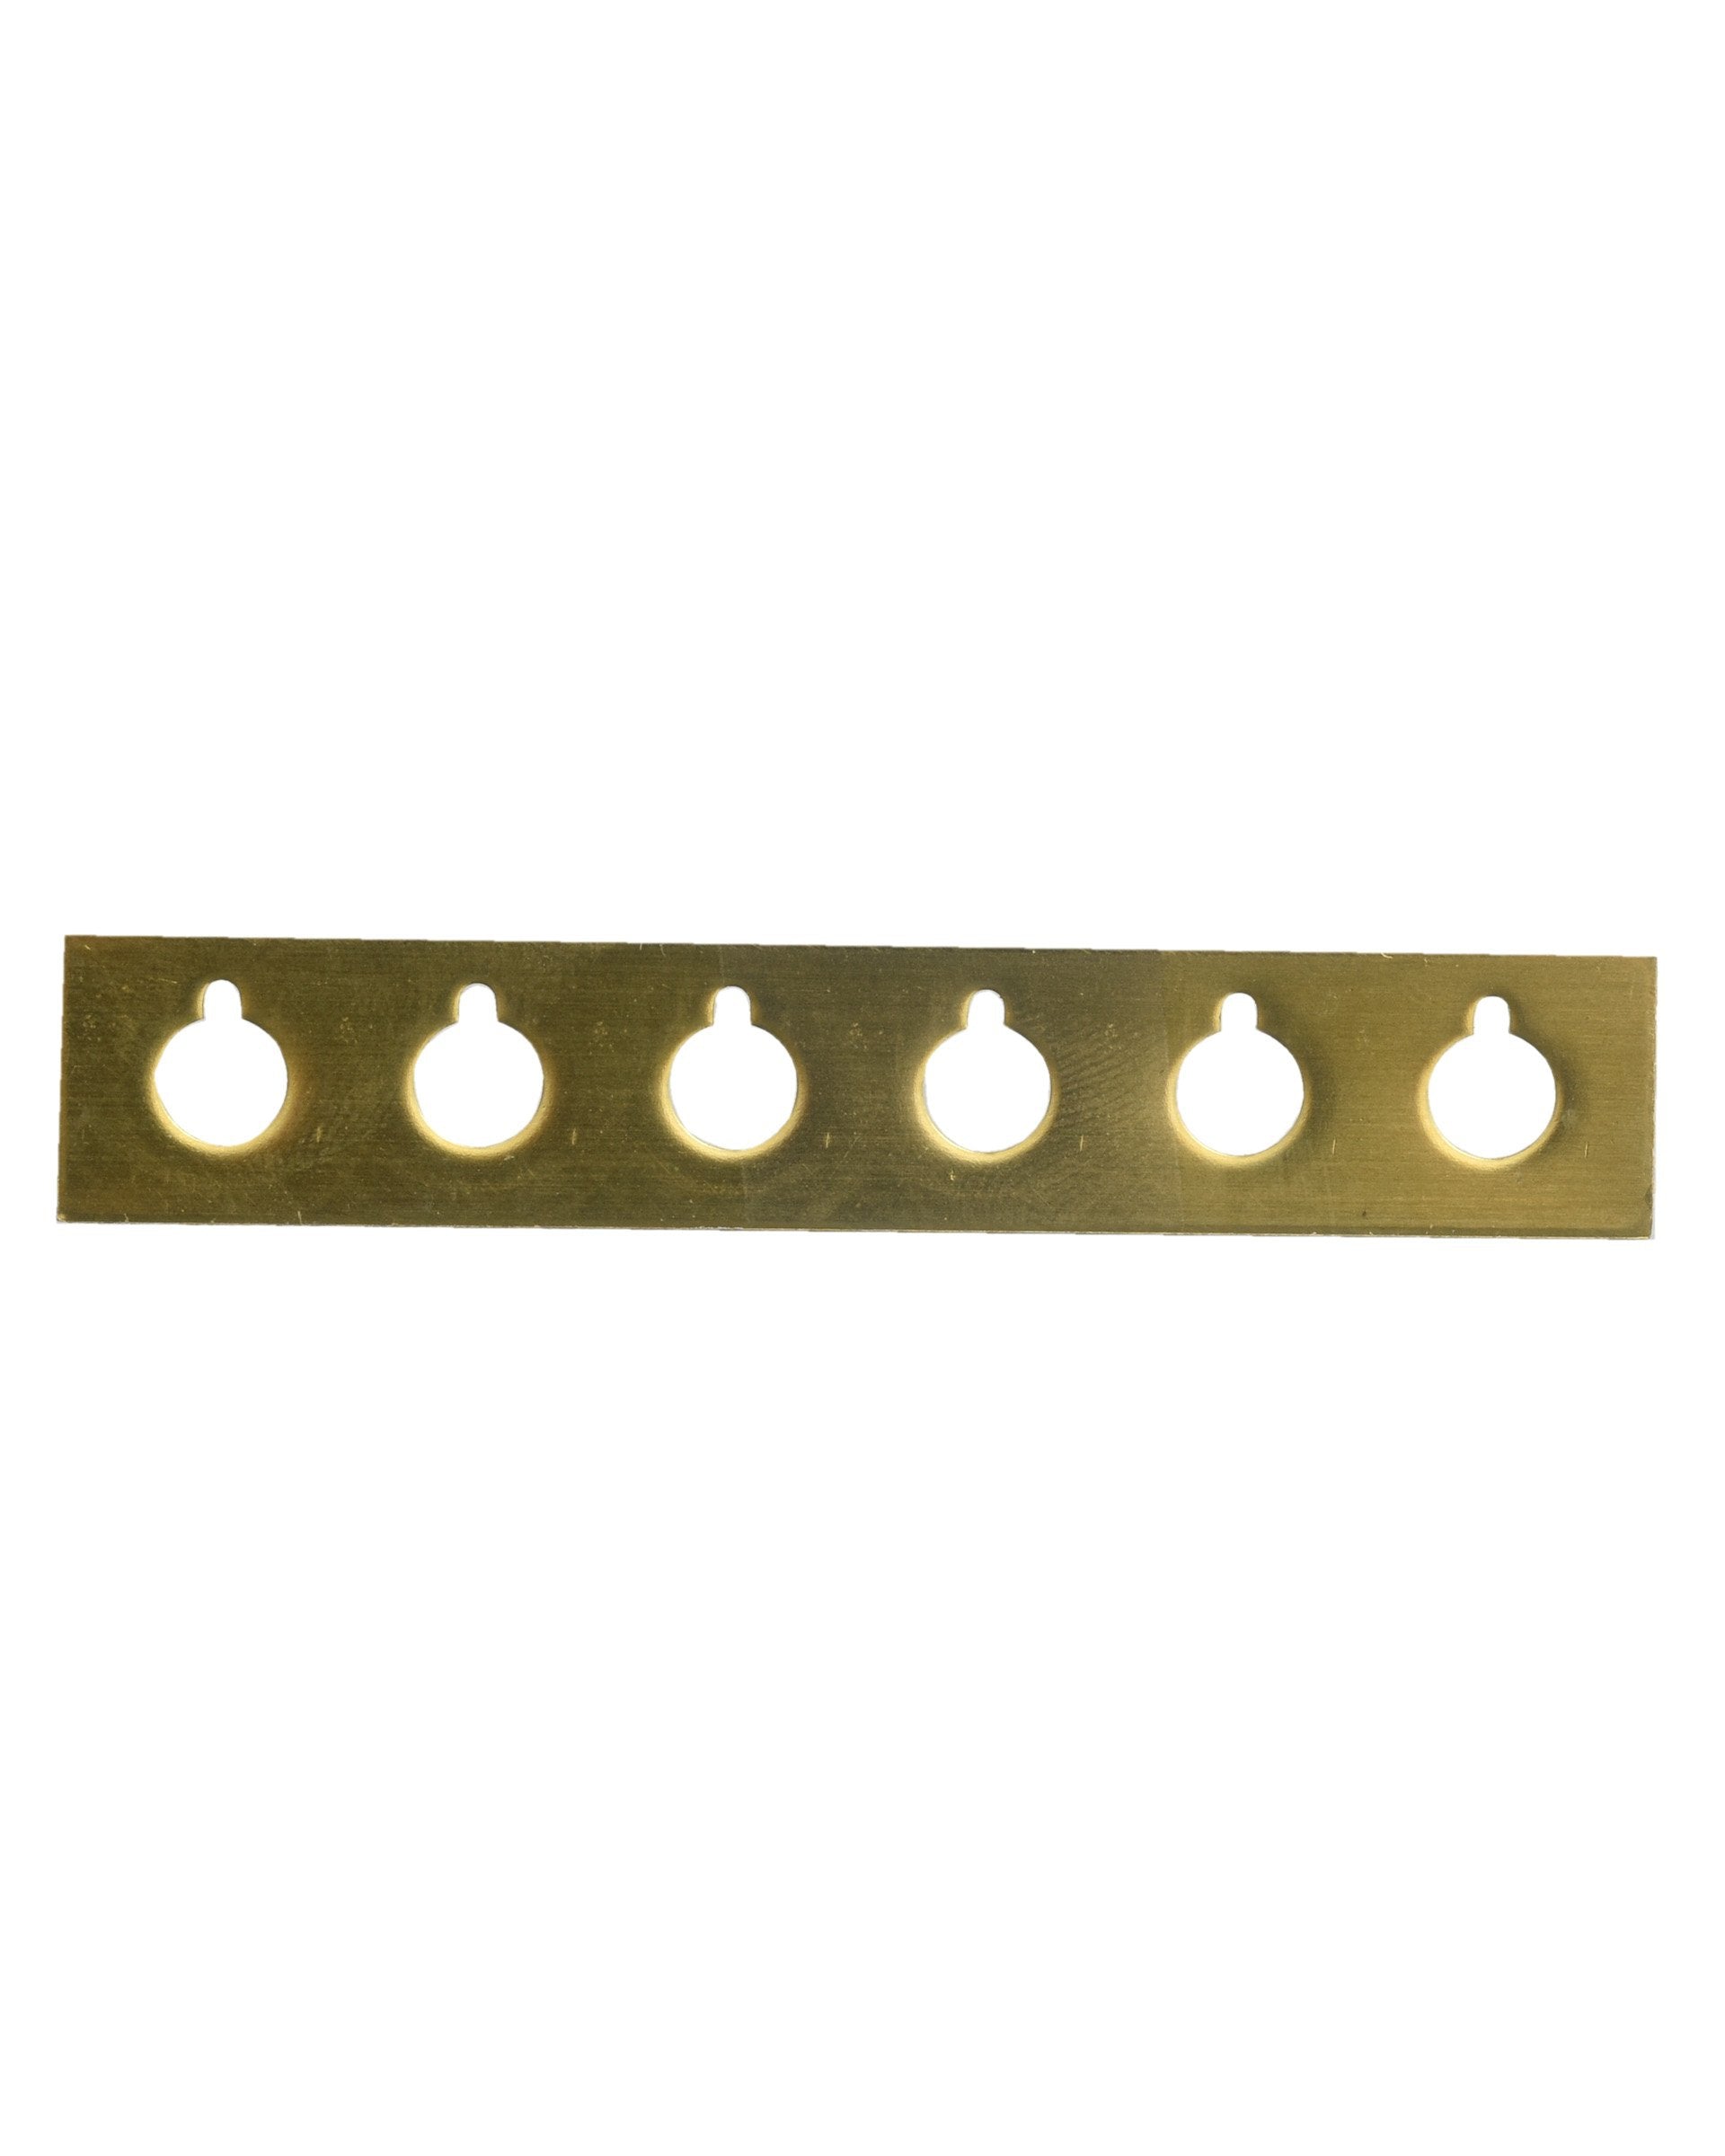 Image 1 of Mitchel's Acoustic Guitar "Plate Mate", 2 5/16" Spacing - SKU# PM100-2-5/16 : Product Type Accessories & Parts : Elderly Instruments